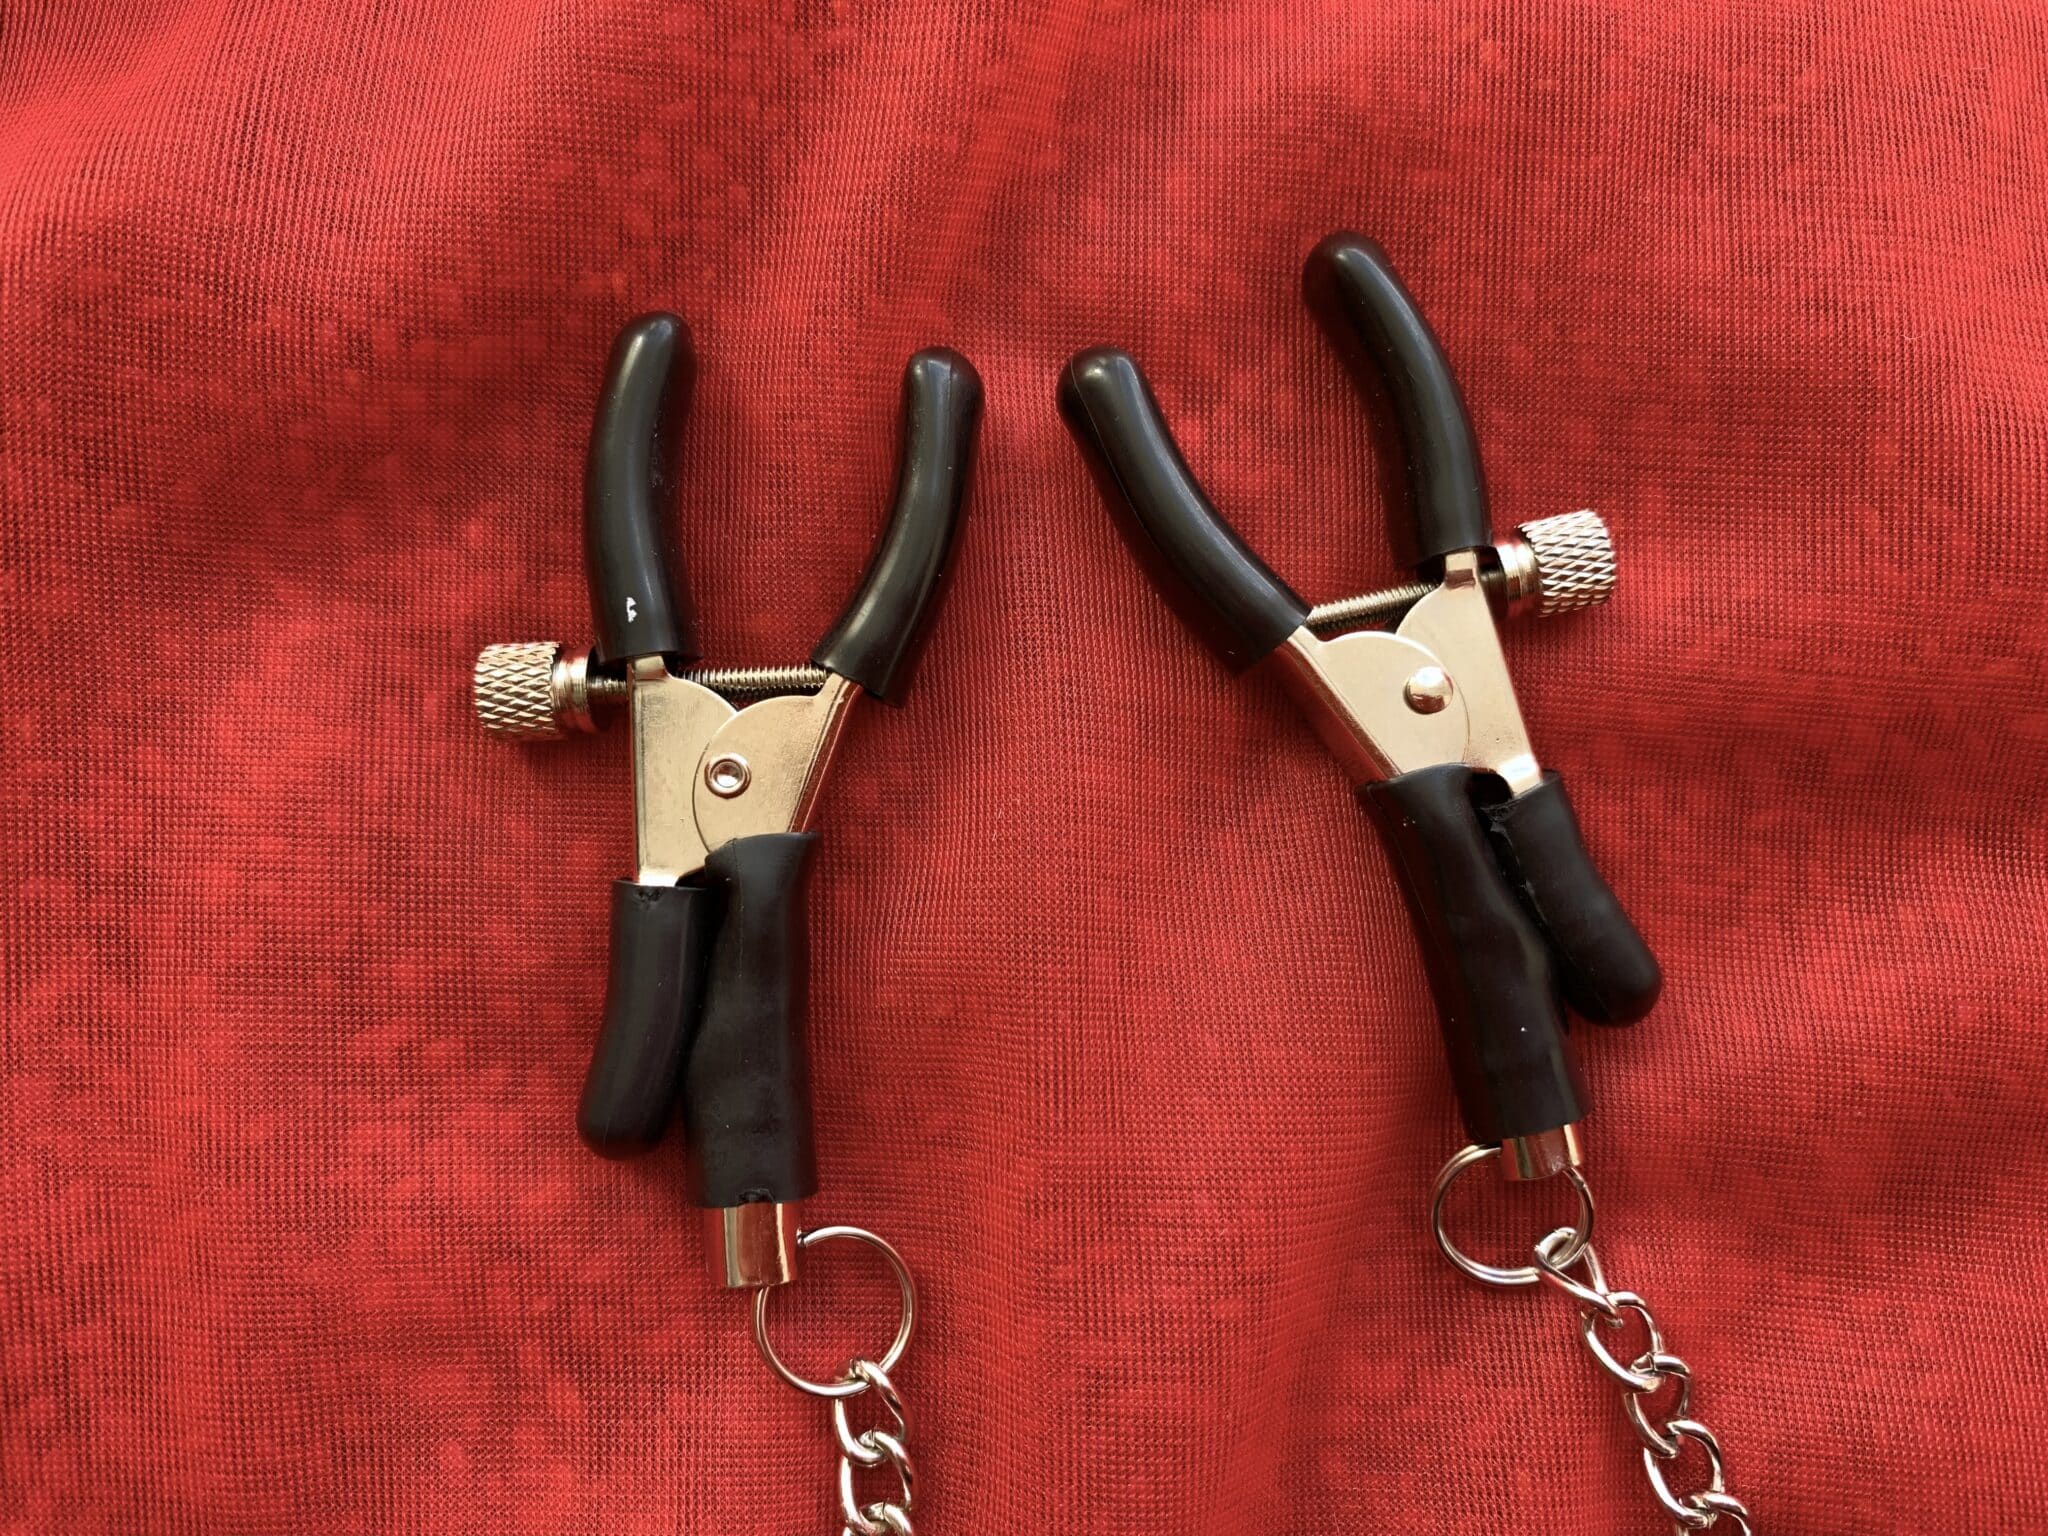 Fetish Fantasy Alligator Nipple Clamps How Easy is the Fetish Fantasy Alligator Nipple Clamps to Use? A Review